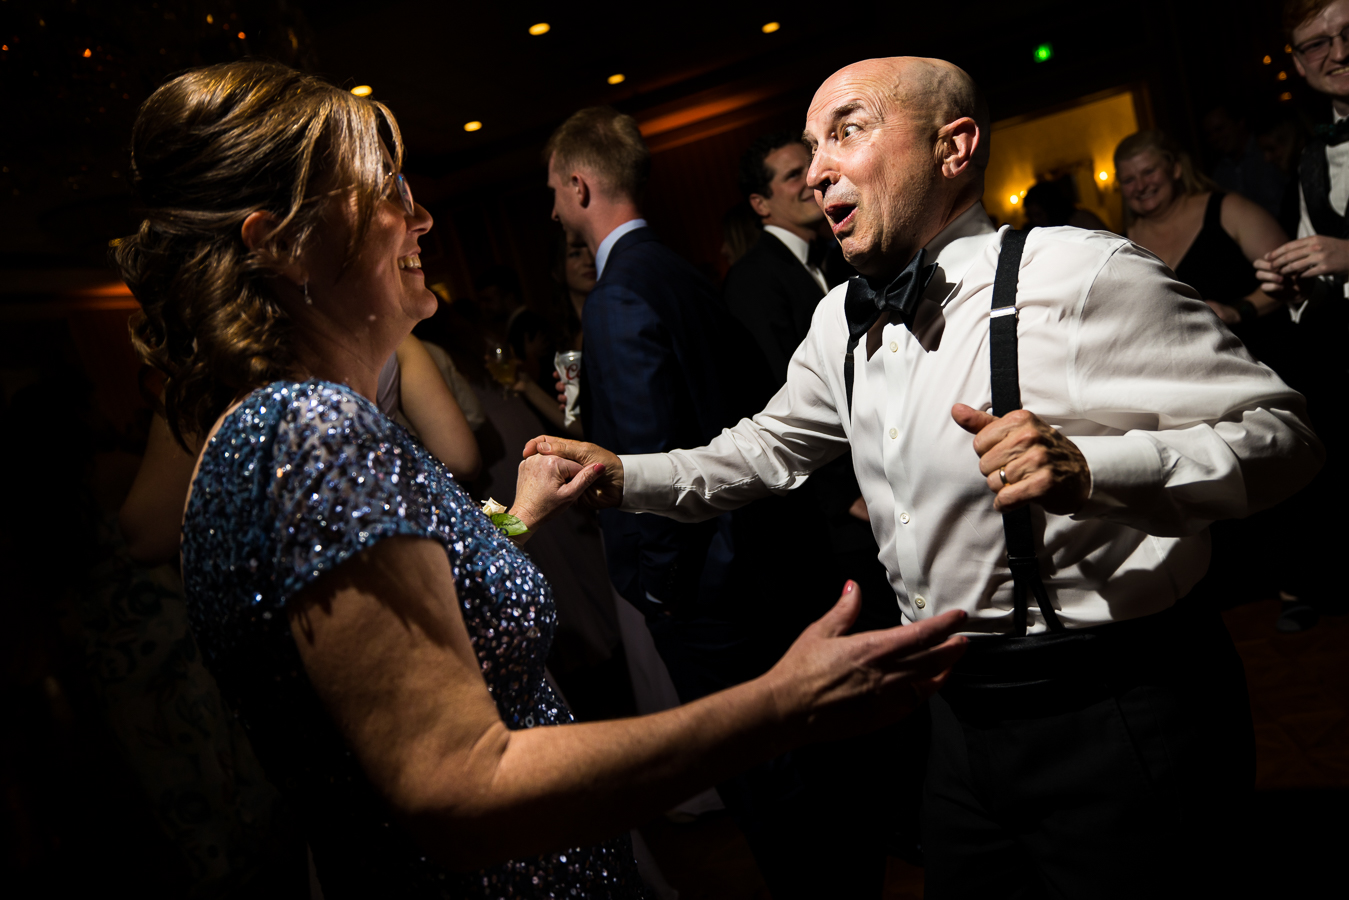 creative, fun wedding photographer, lisa rhinehart, captures this fun image of the grooms mother and father dancing together on the dance floor